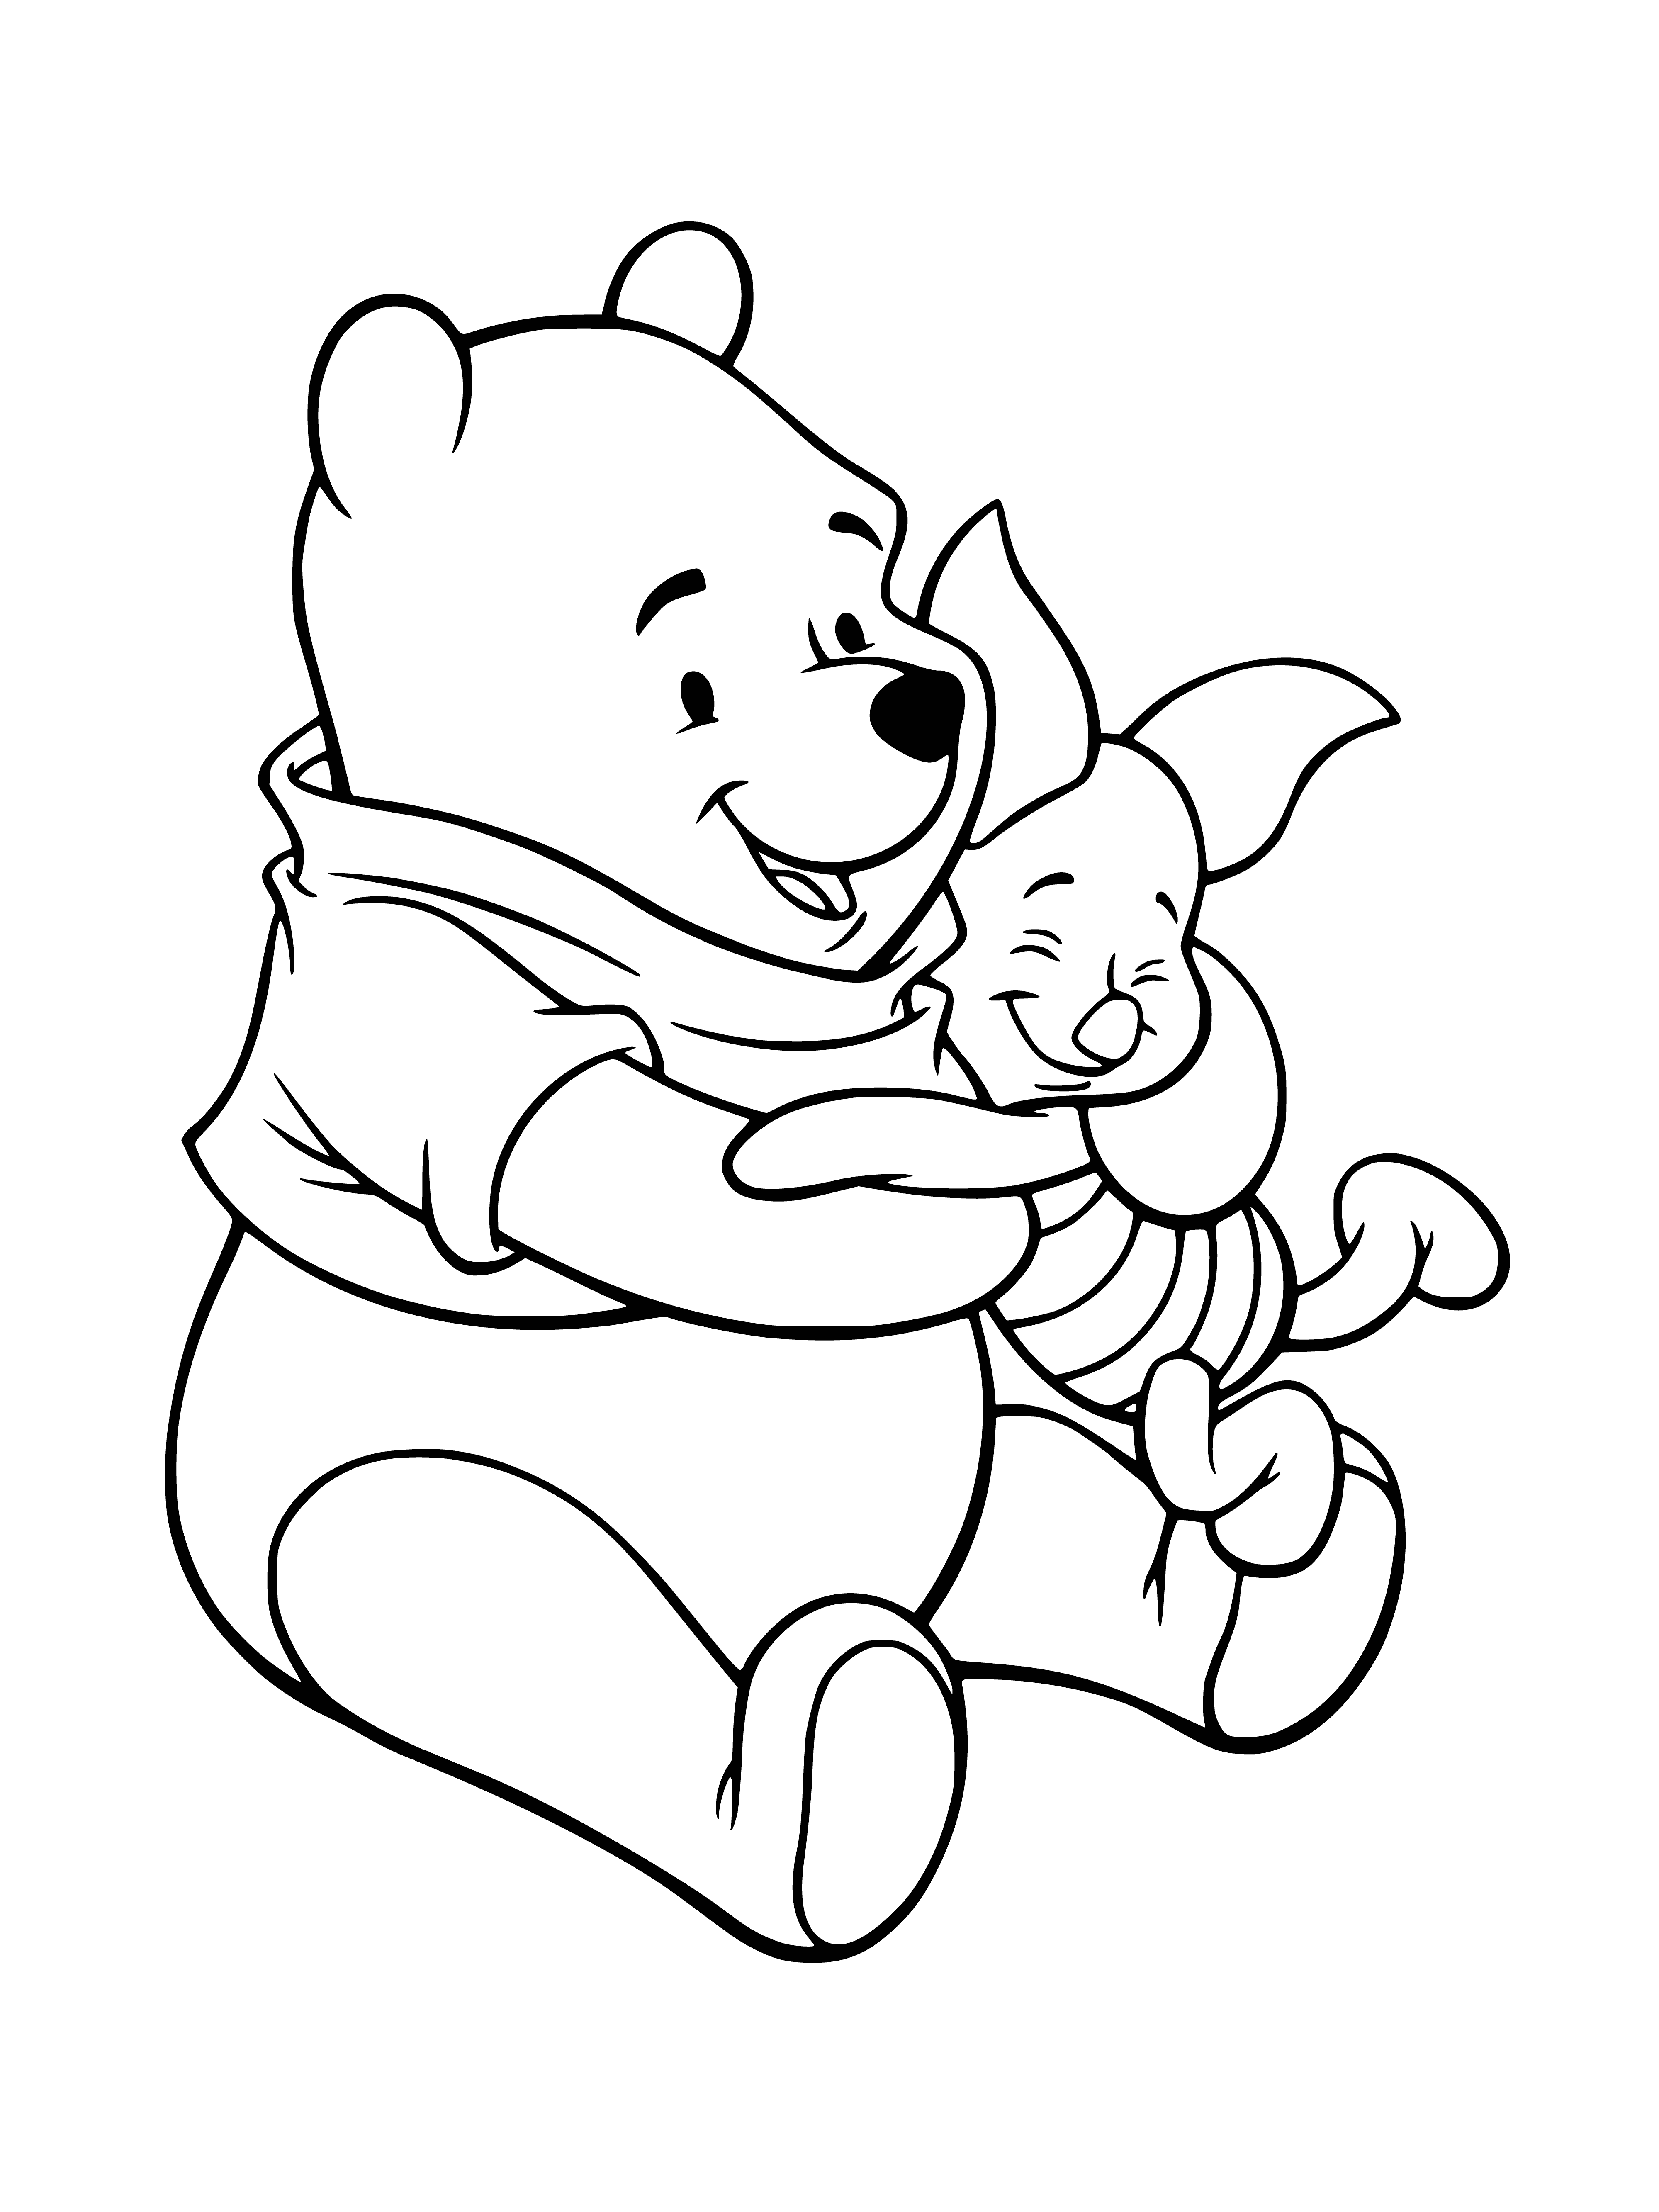 coloring page: Winnie the Pooh & Piggy Pig smile while holding a honey pot & pencil on a coloring page.